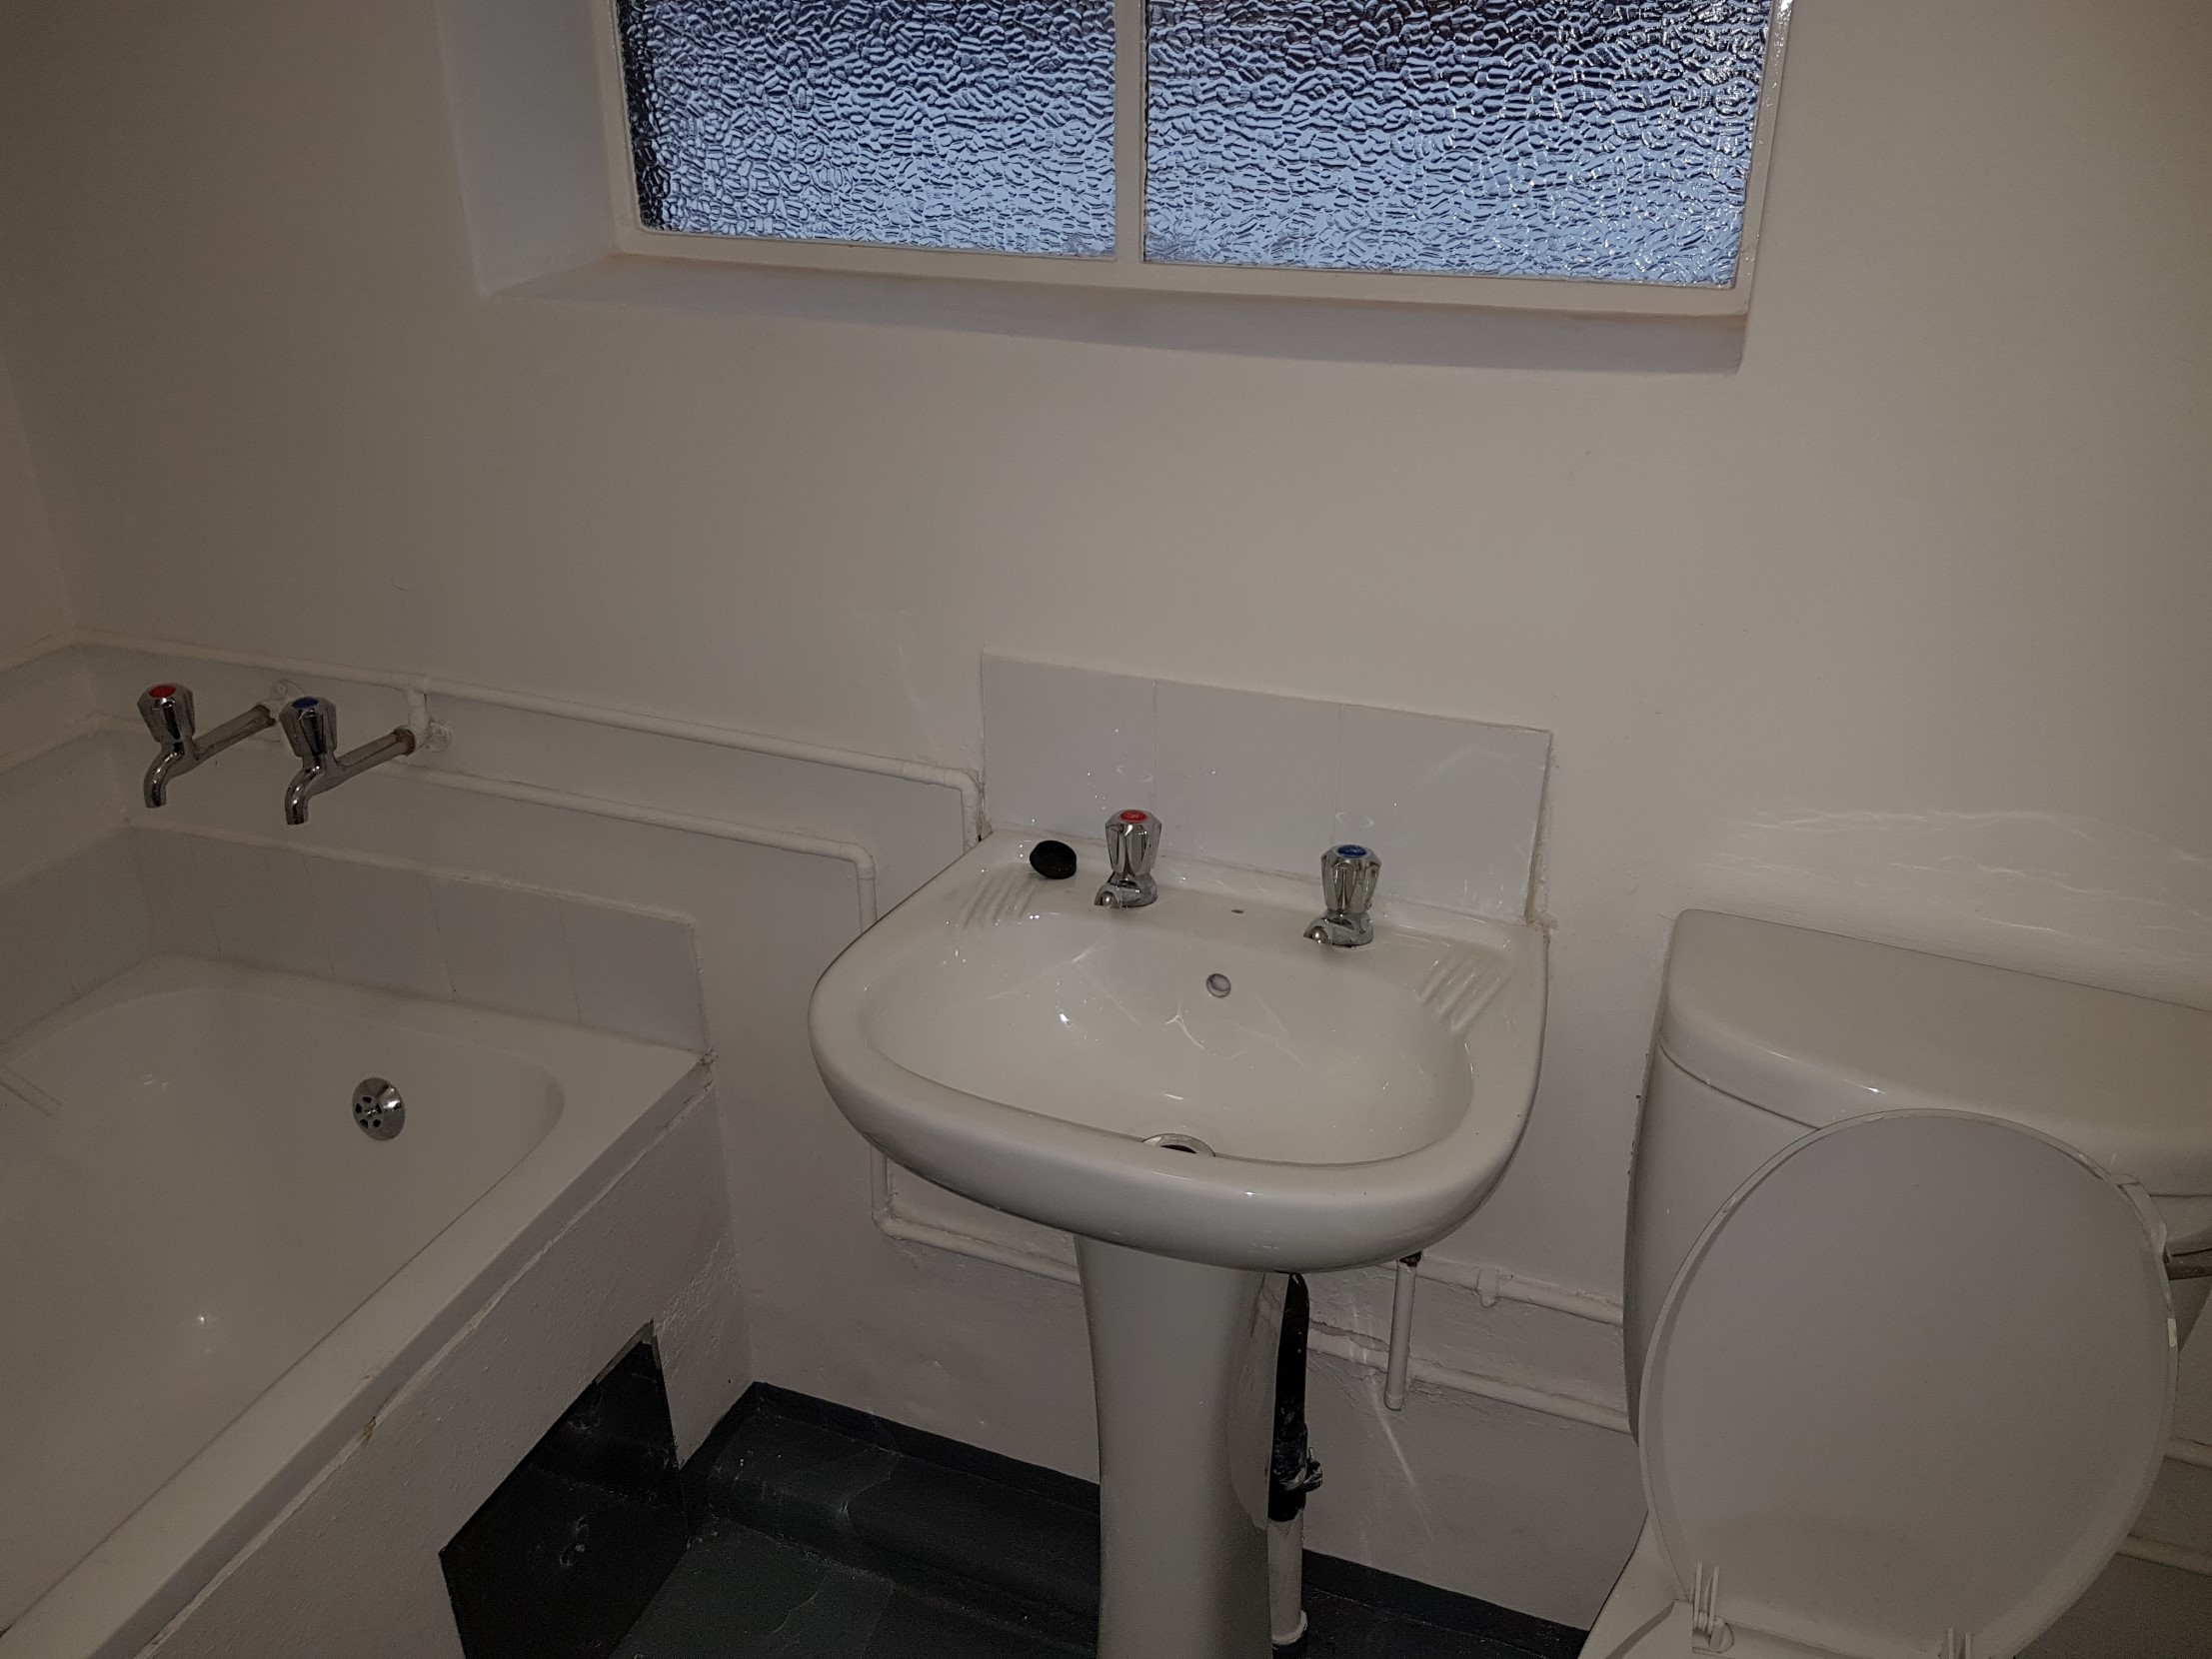 A NEAT 2 BEDROOM FLAT IS AVAILABLE TO LET